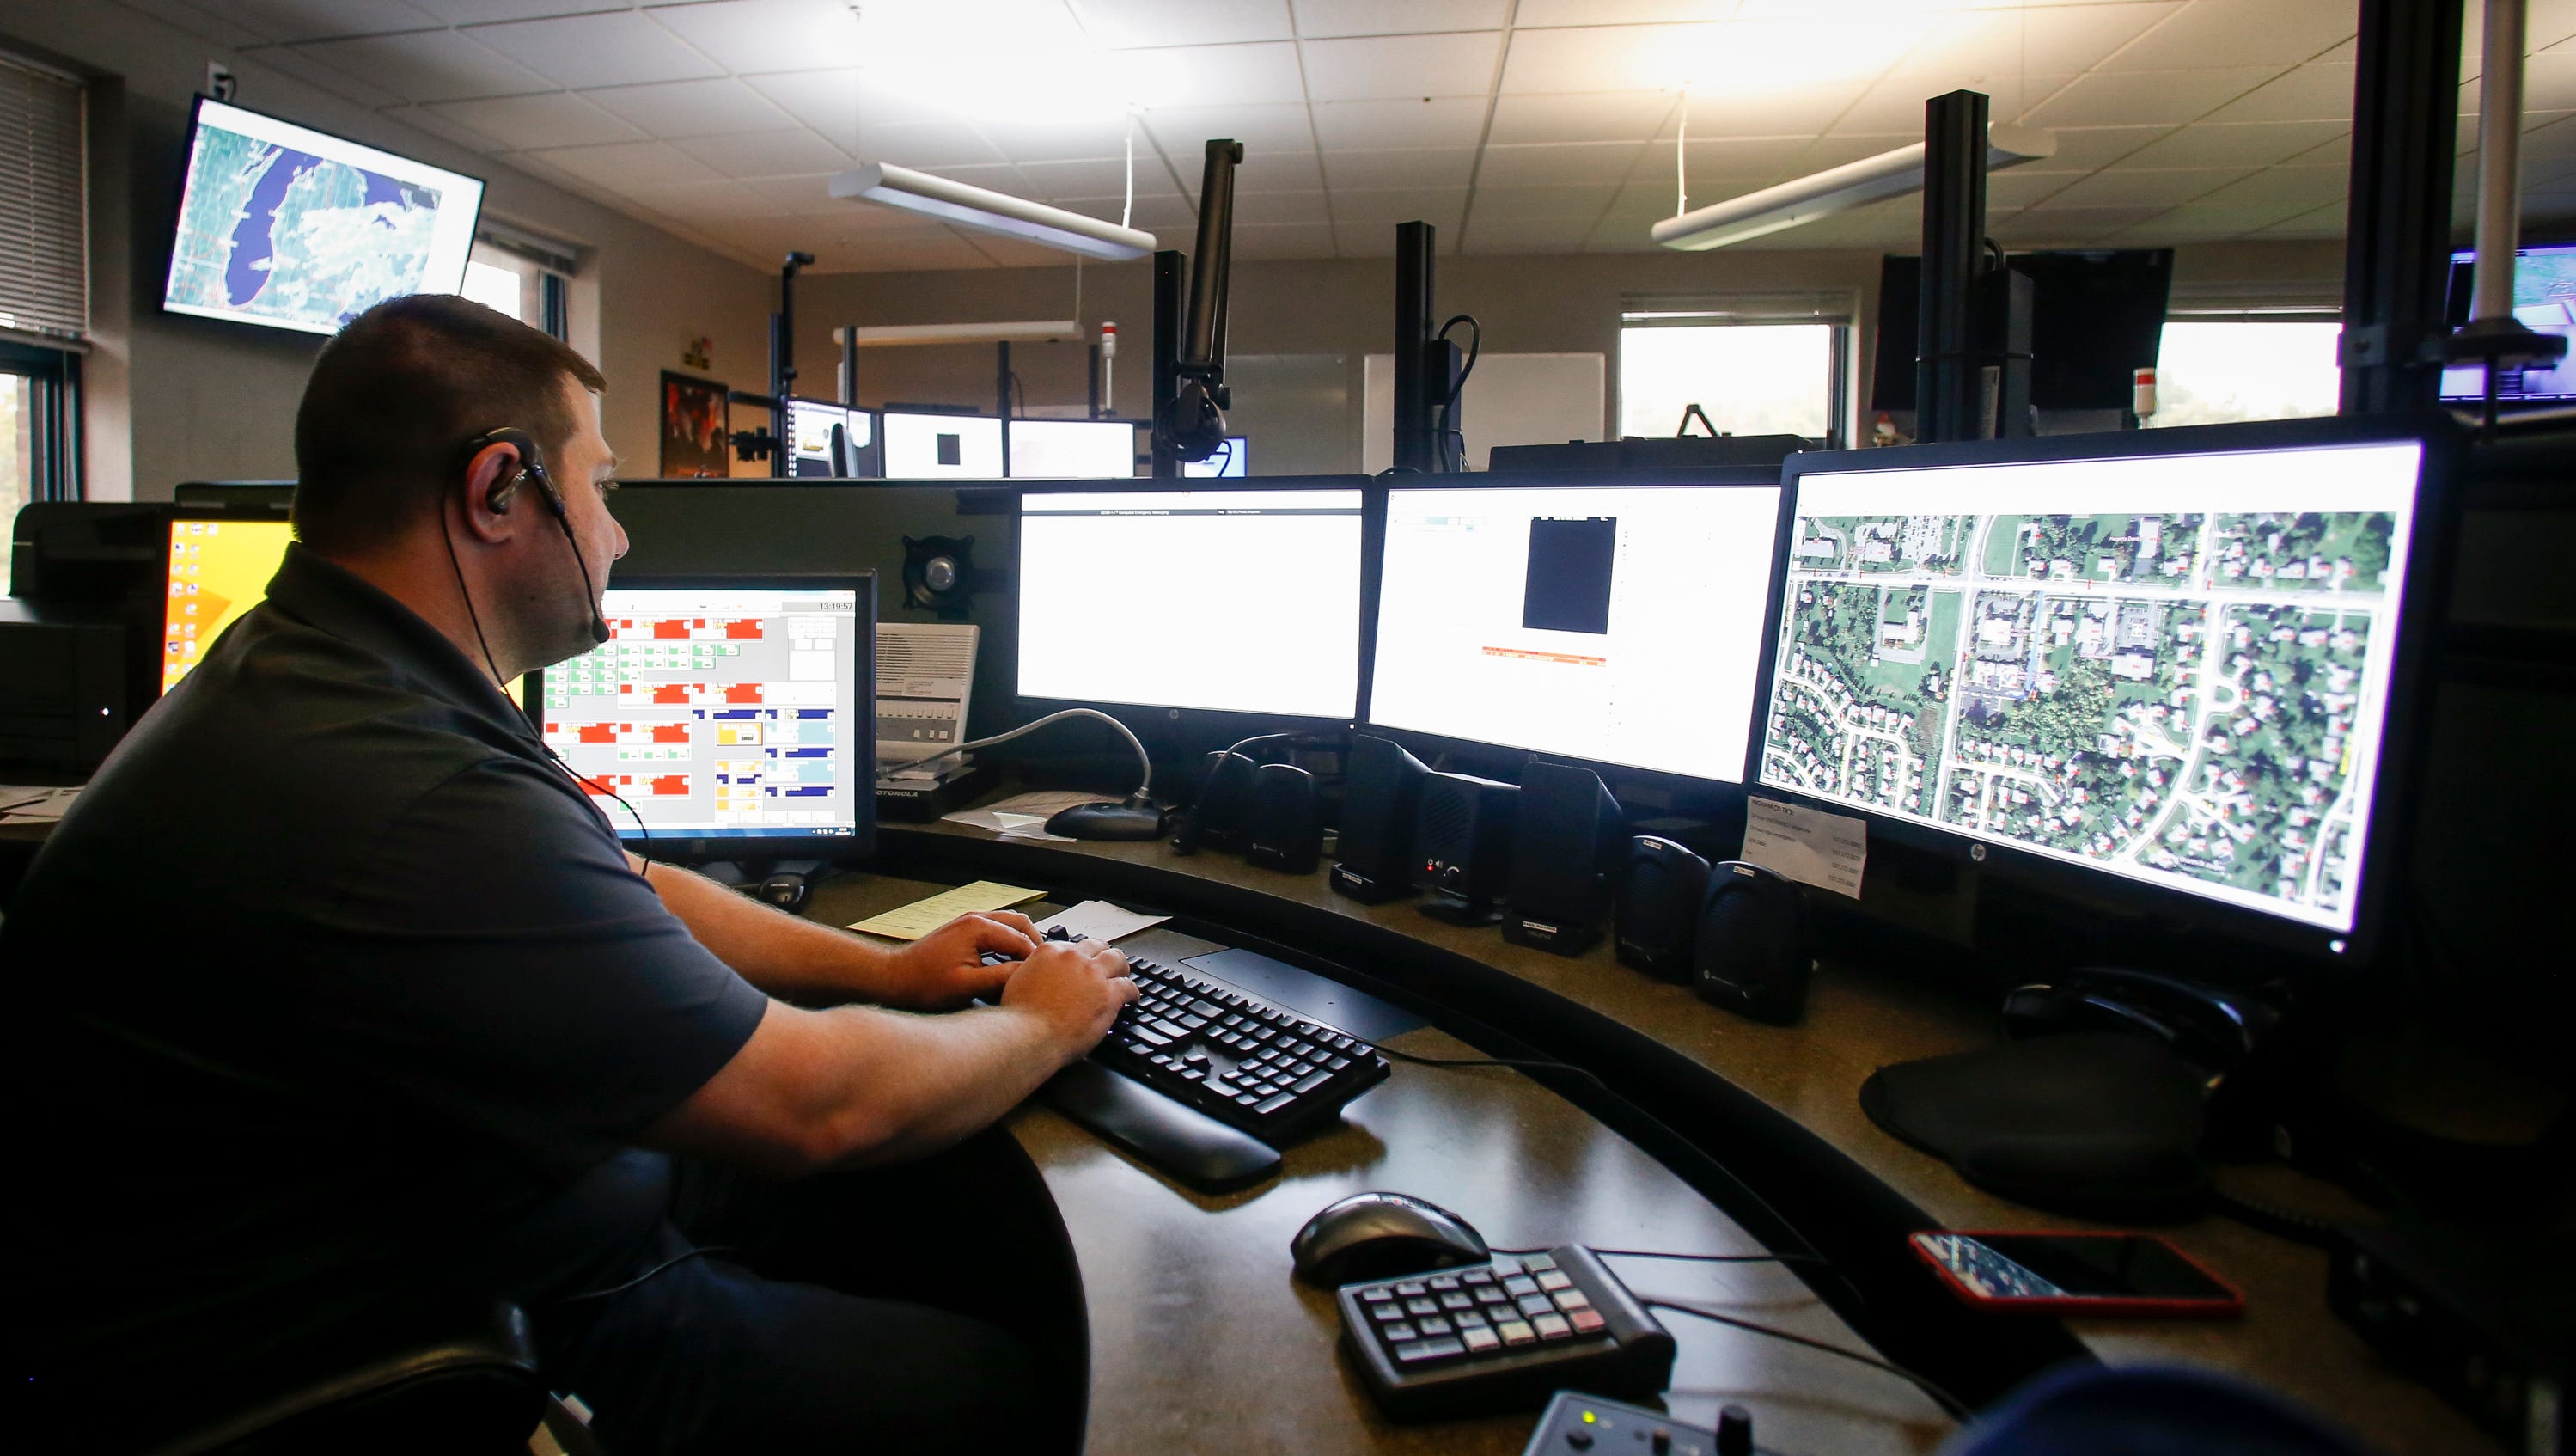 911 dispatch genesee county